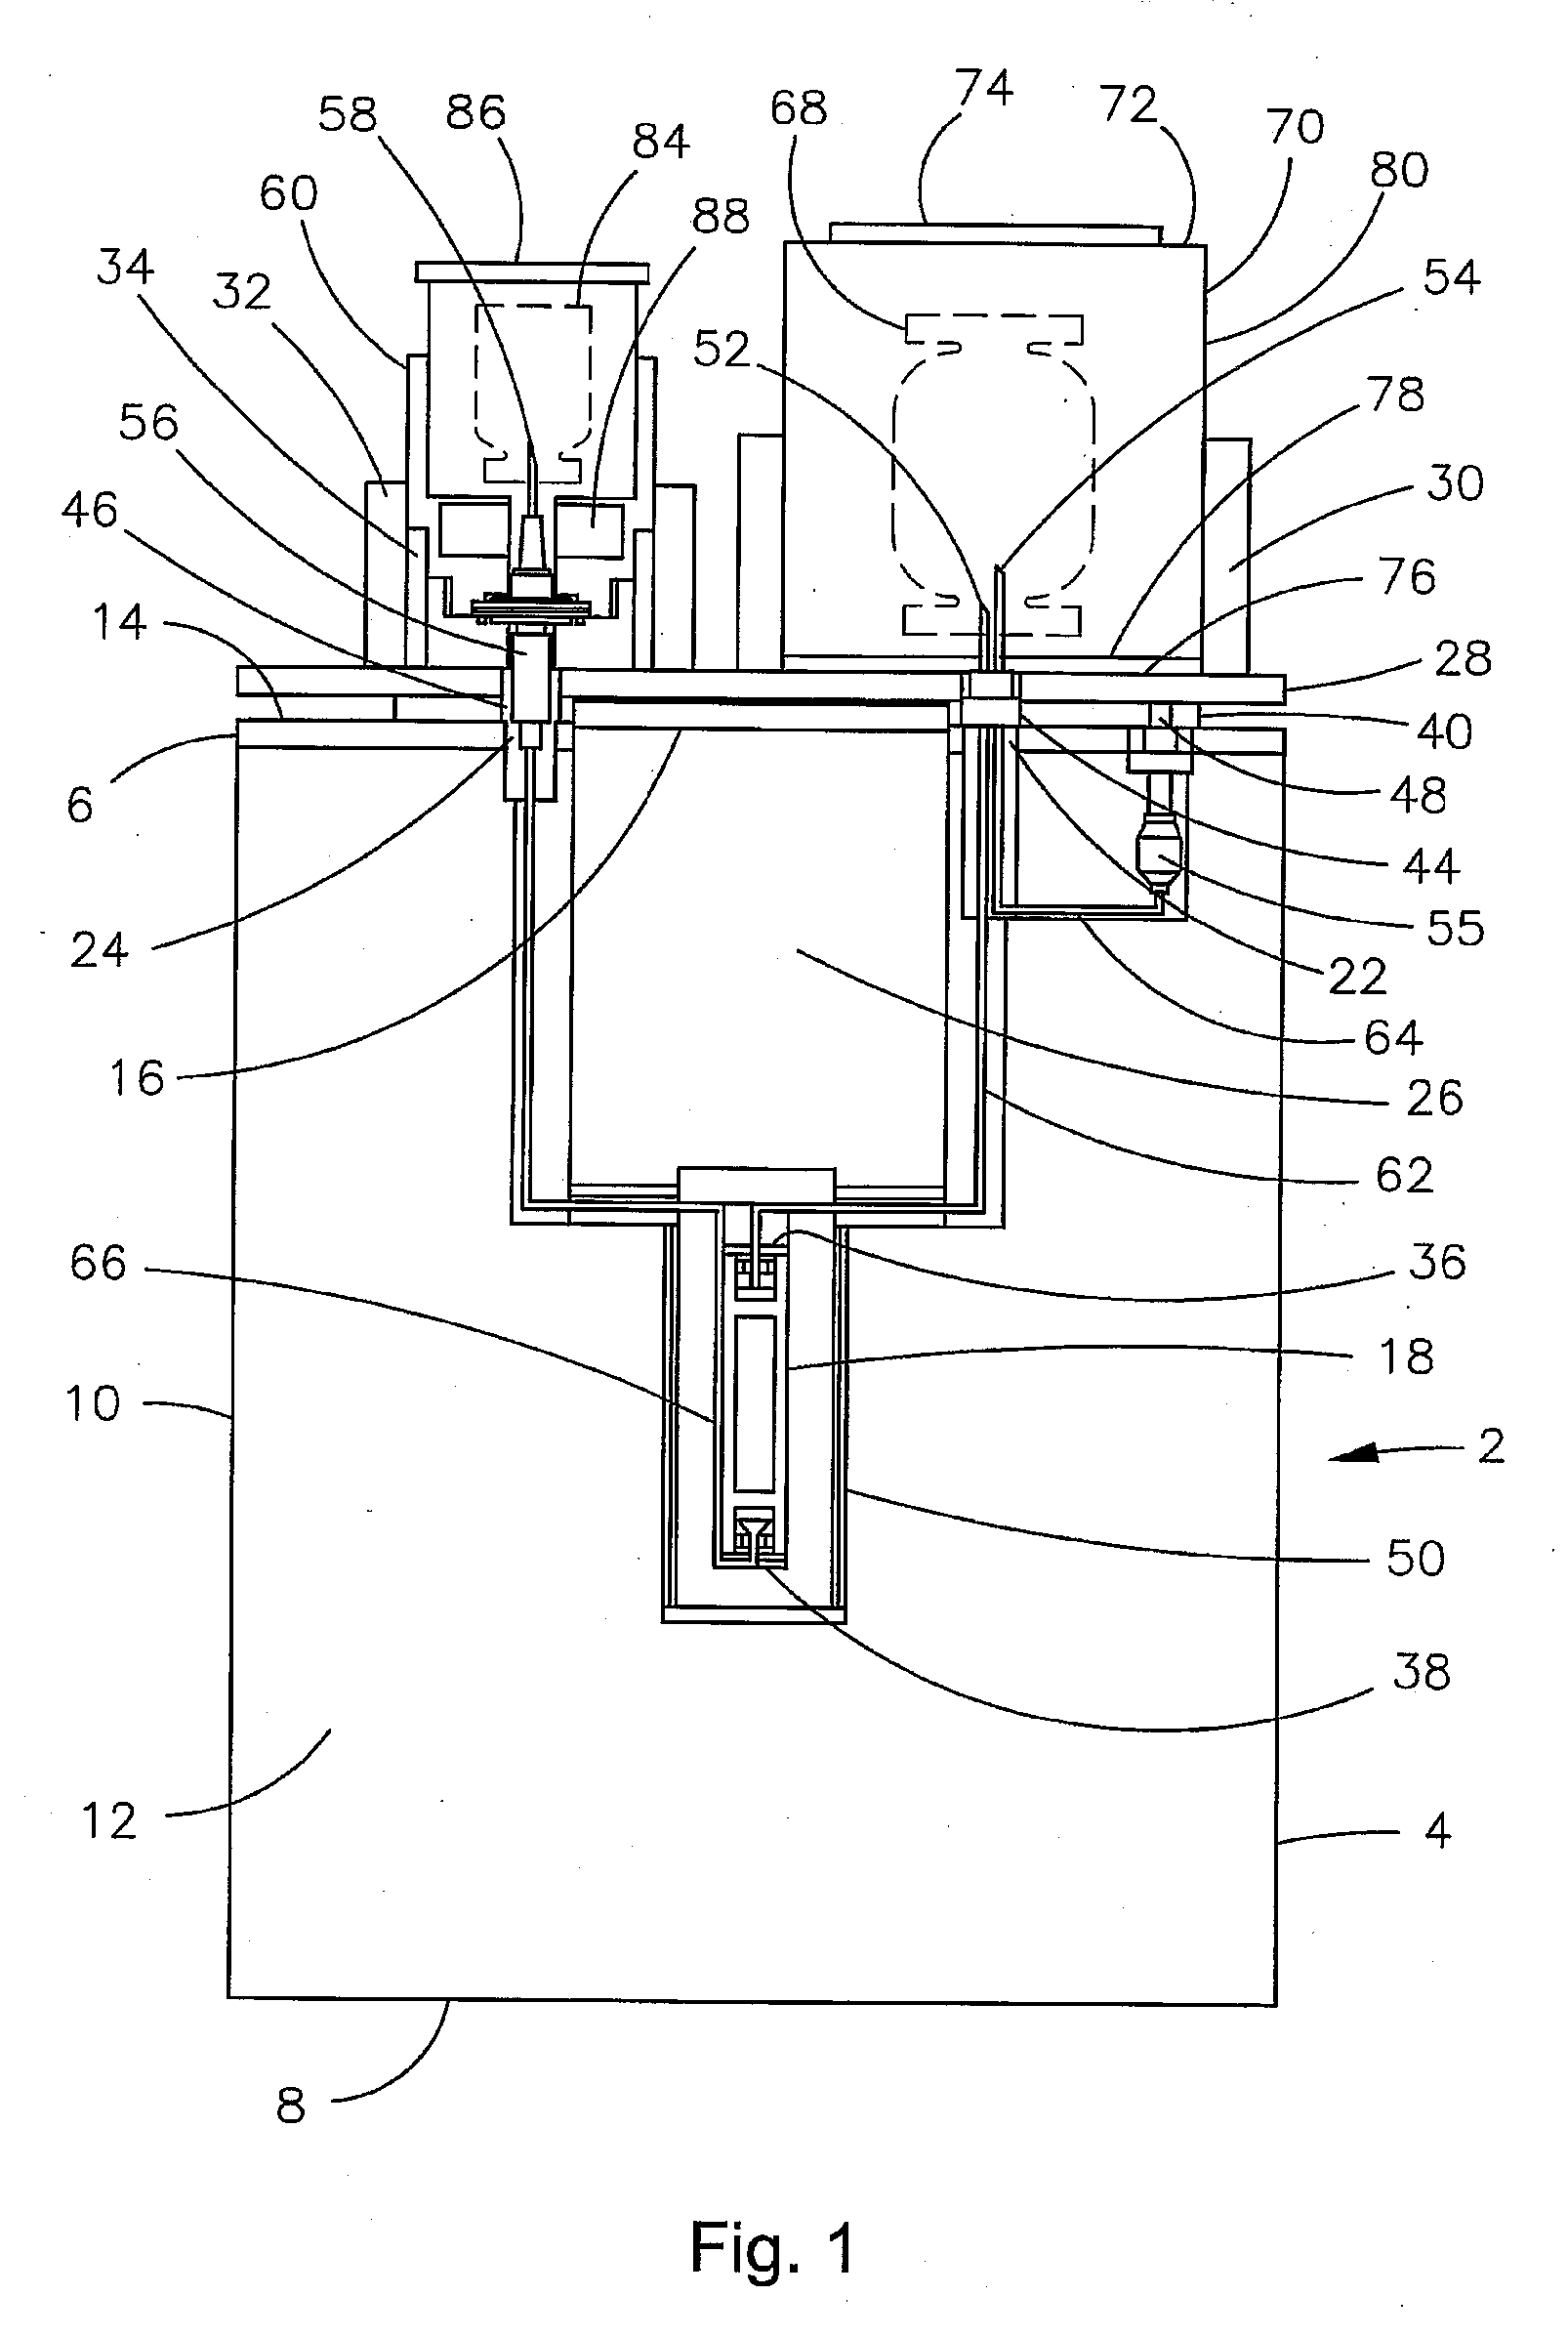 Systems and Methods for Radioisotope Generation